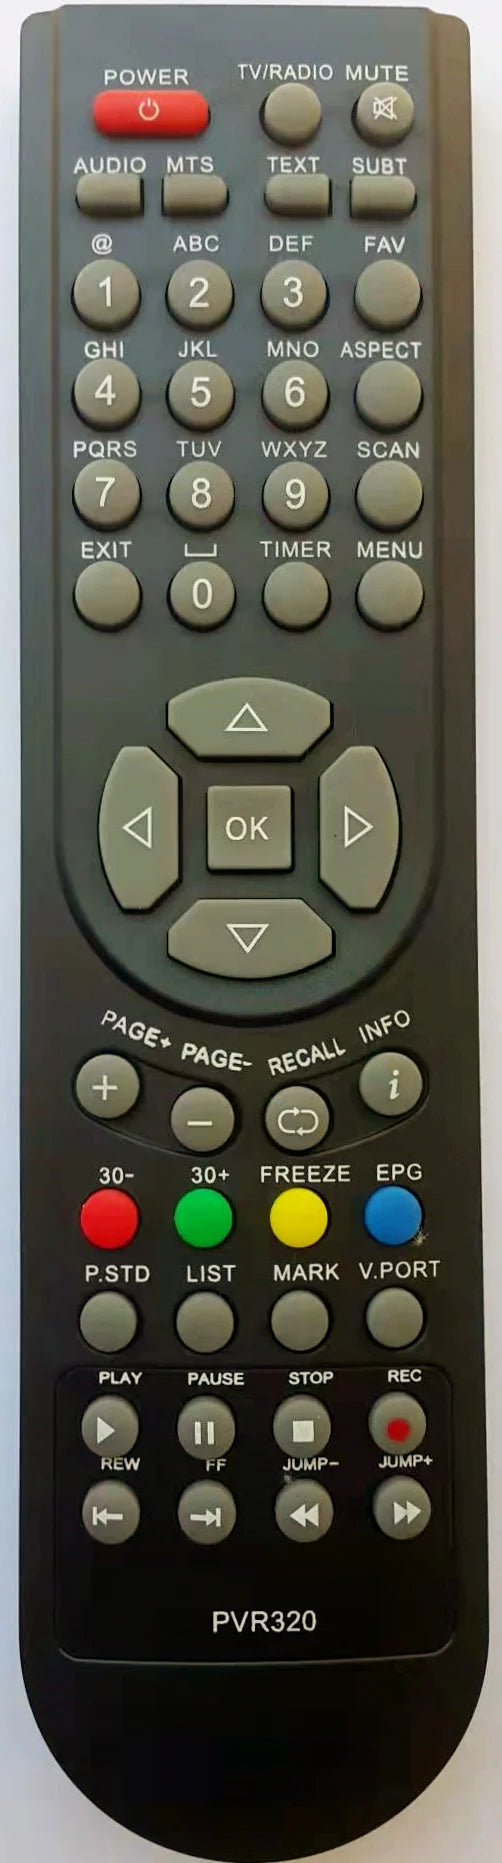 Bauhn HDPVR2400 PVR Replacement Remote Control